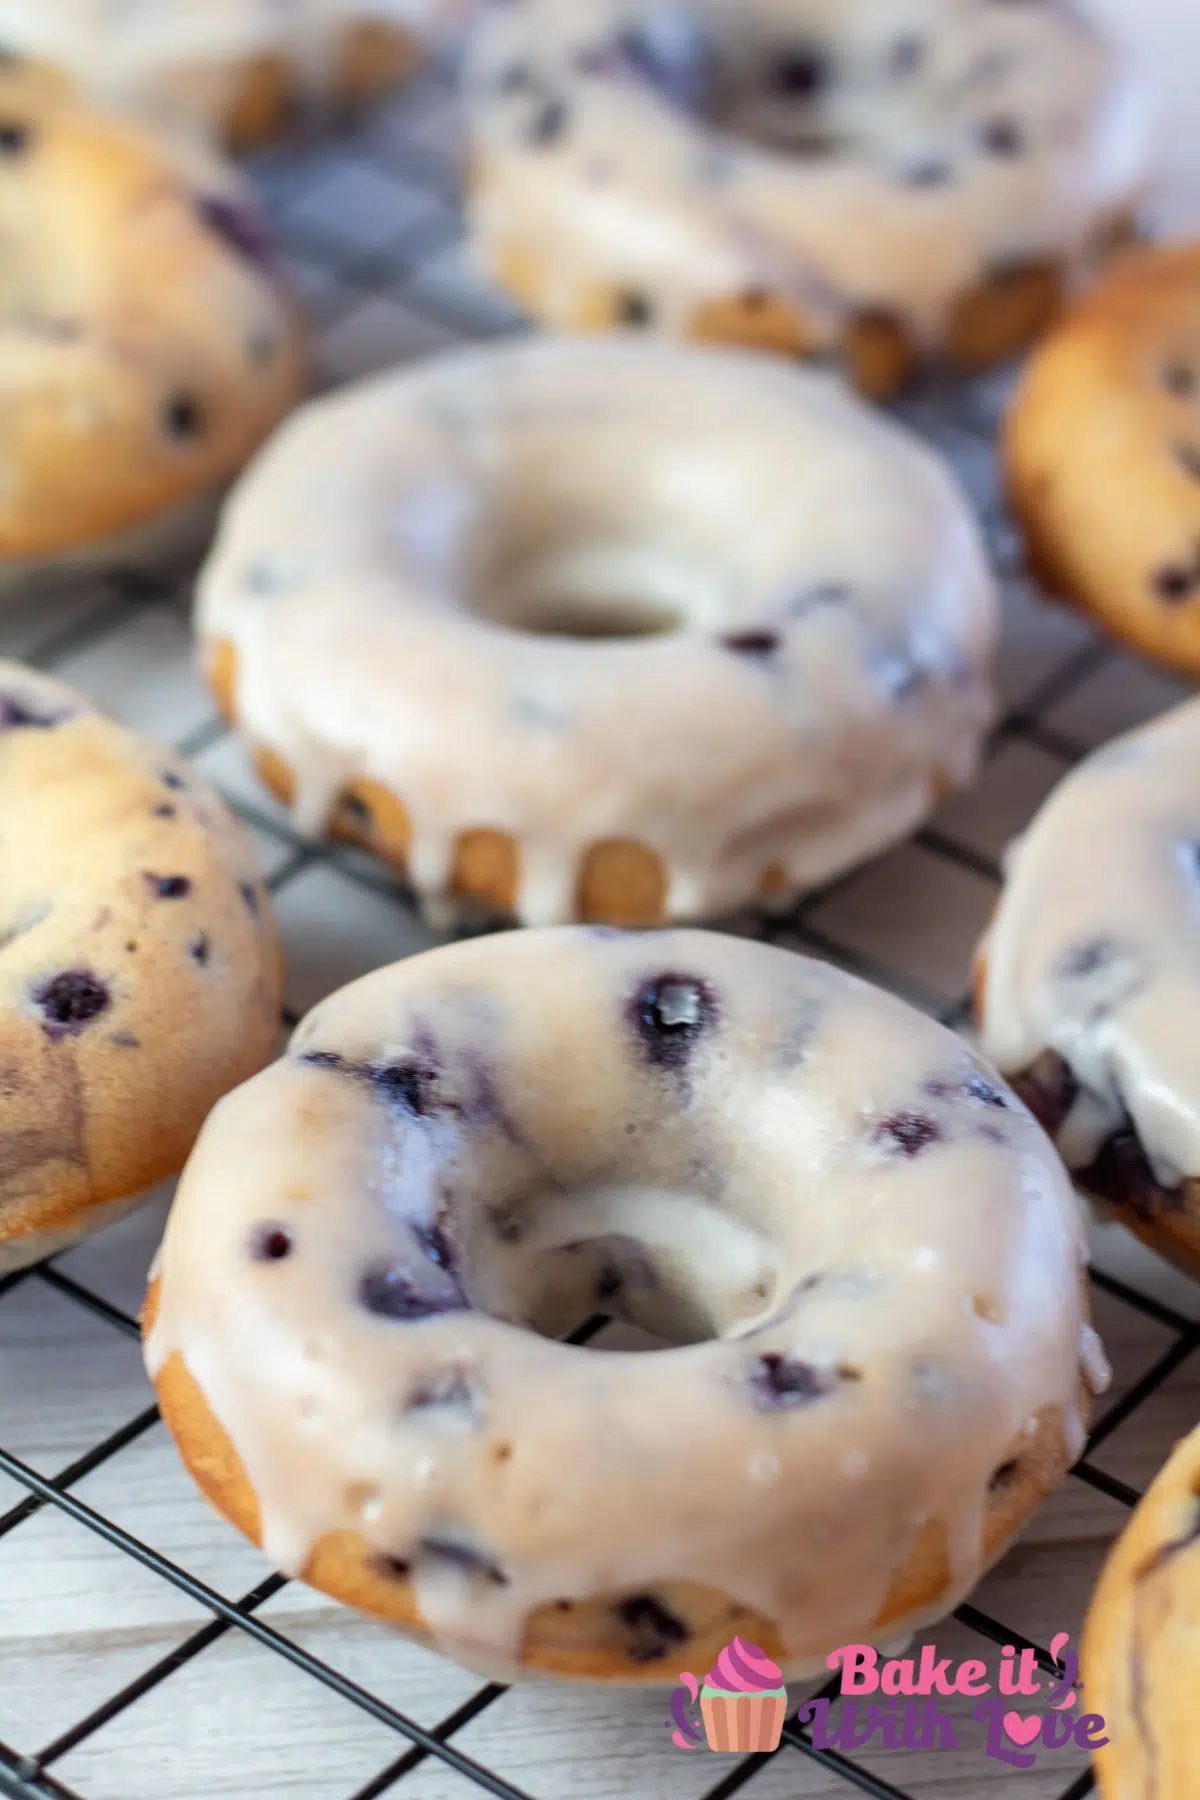 Tall image of baked blueberry donuts.